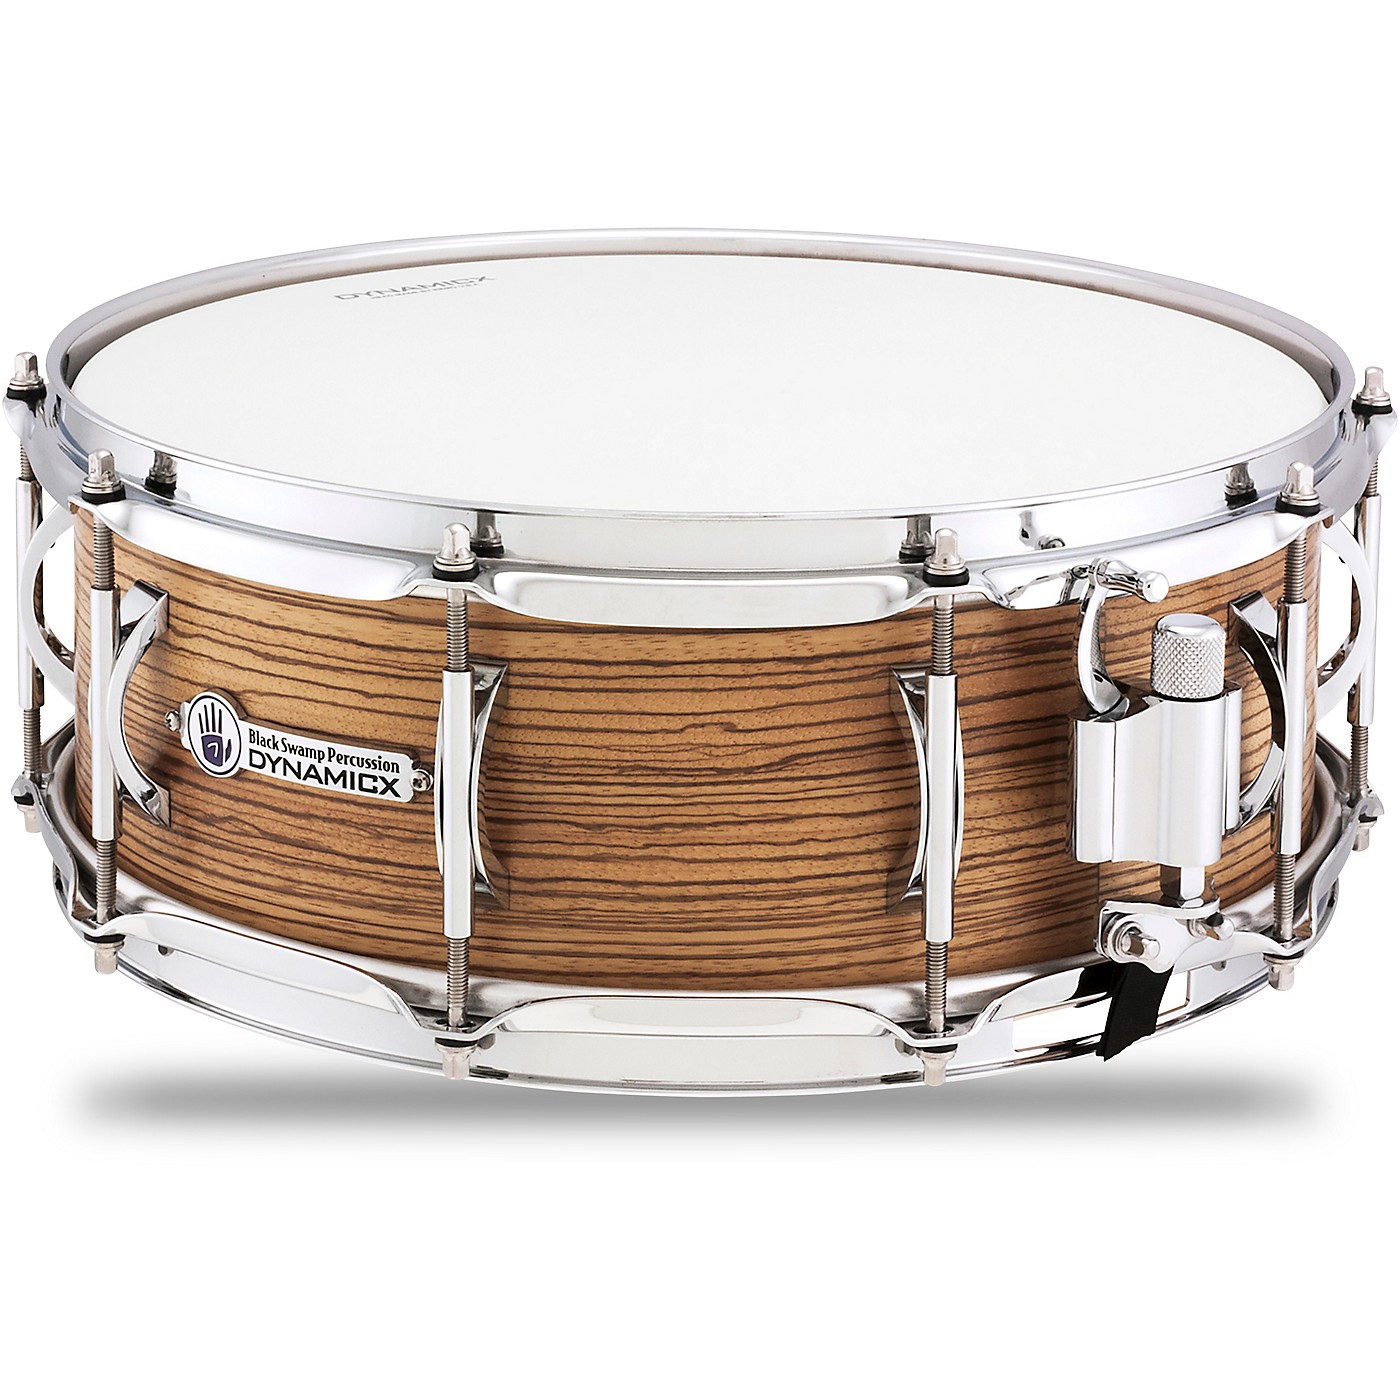 Black Swamp Percussion Dynamicx BackBeat Series Snare Drum with Zebrawood Veneer thumbnail